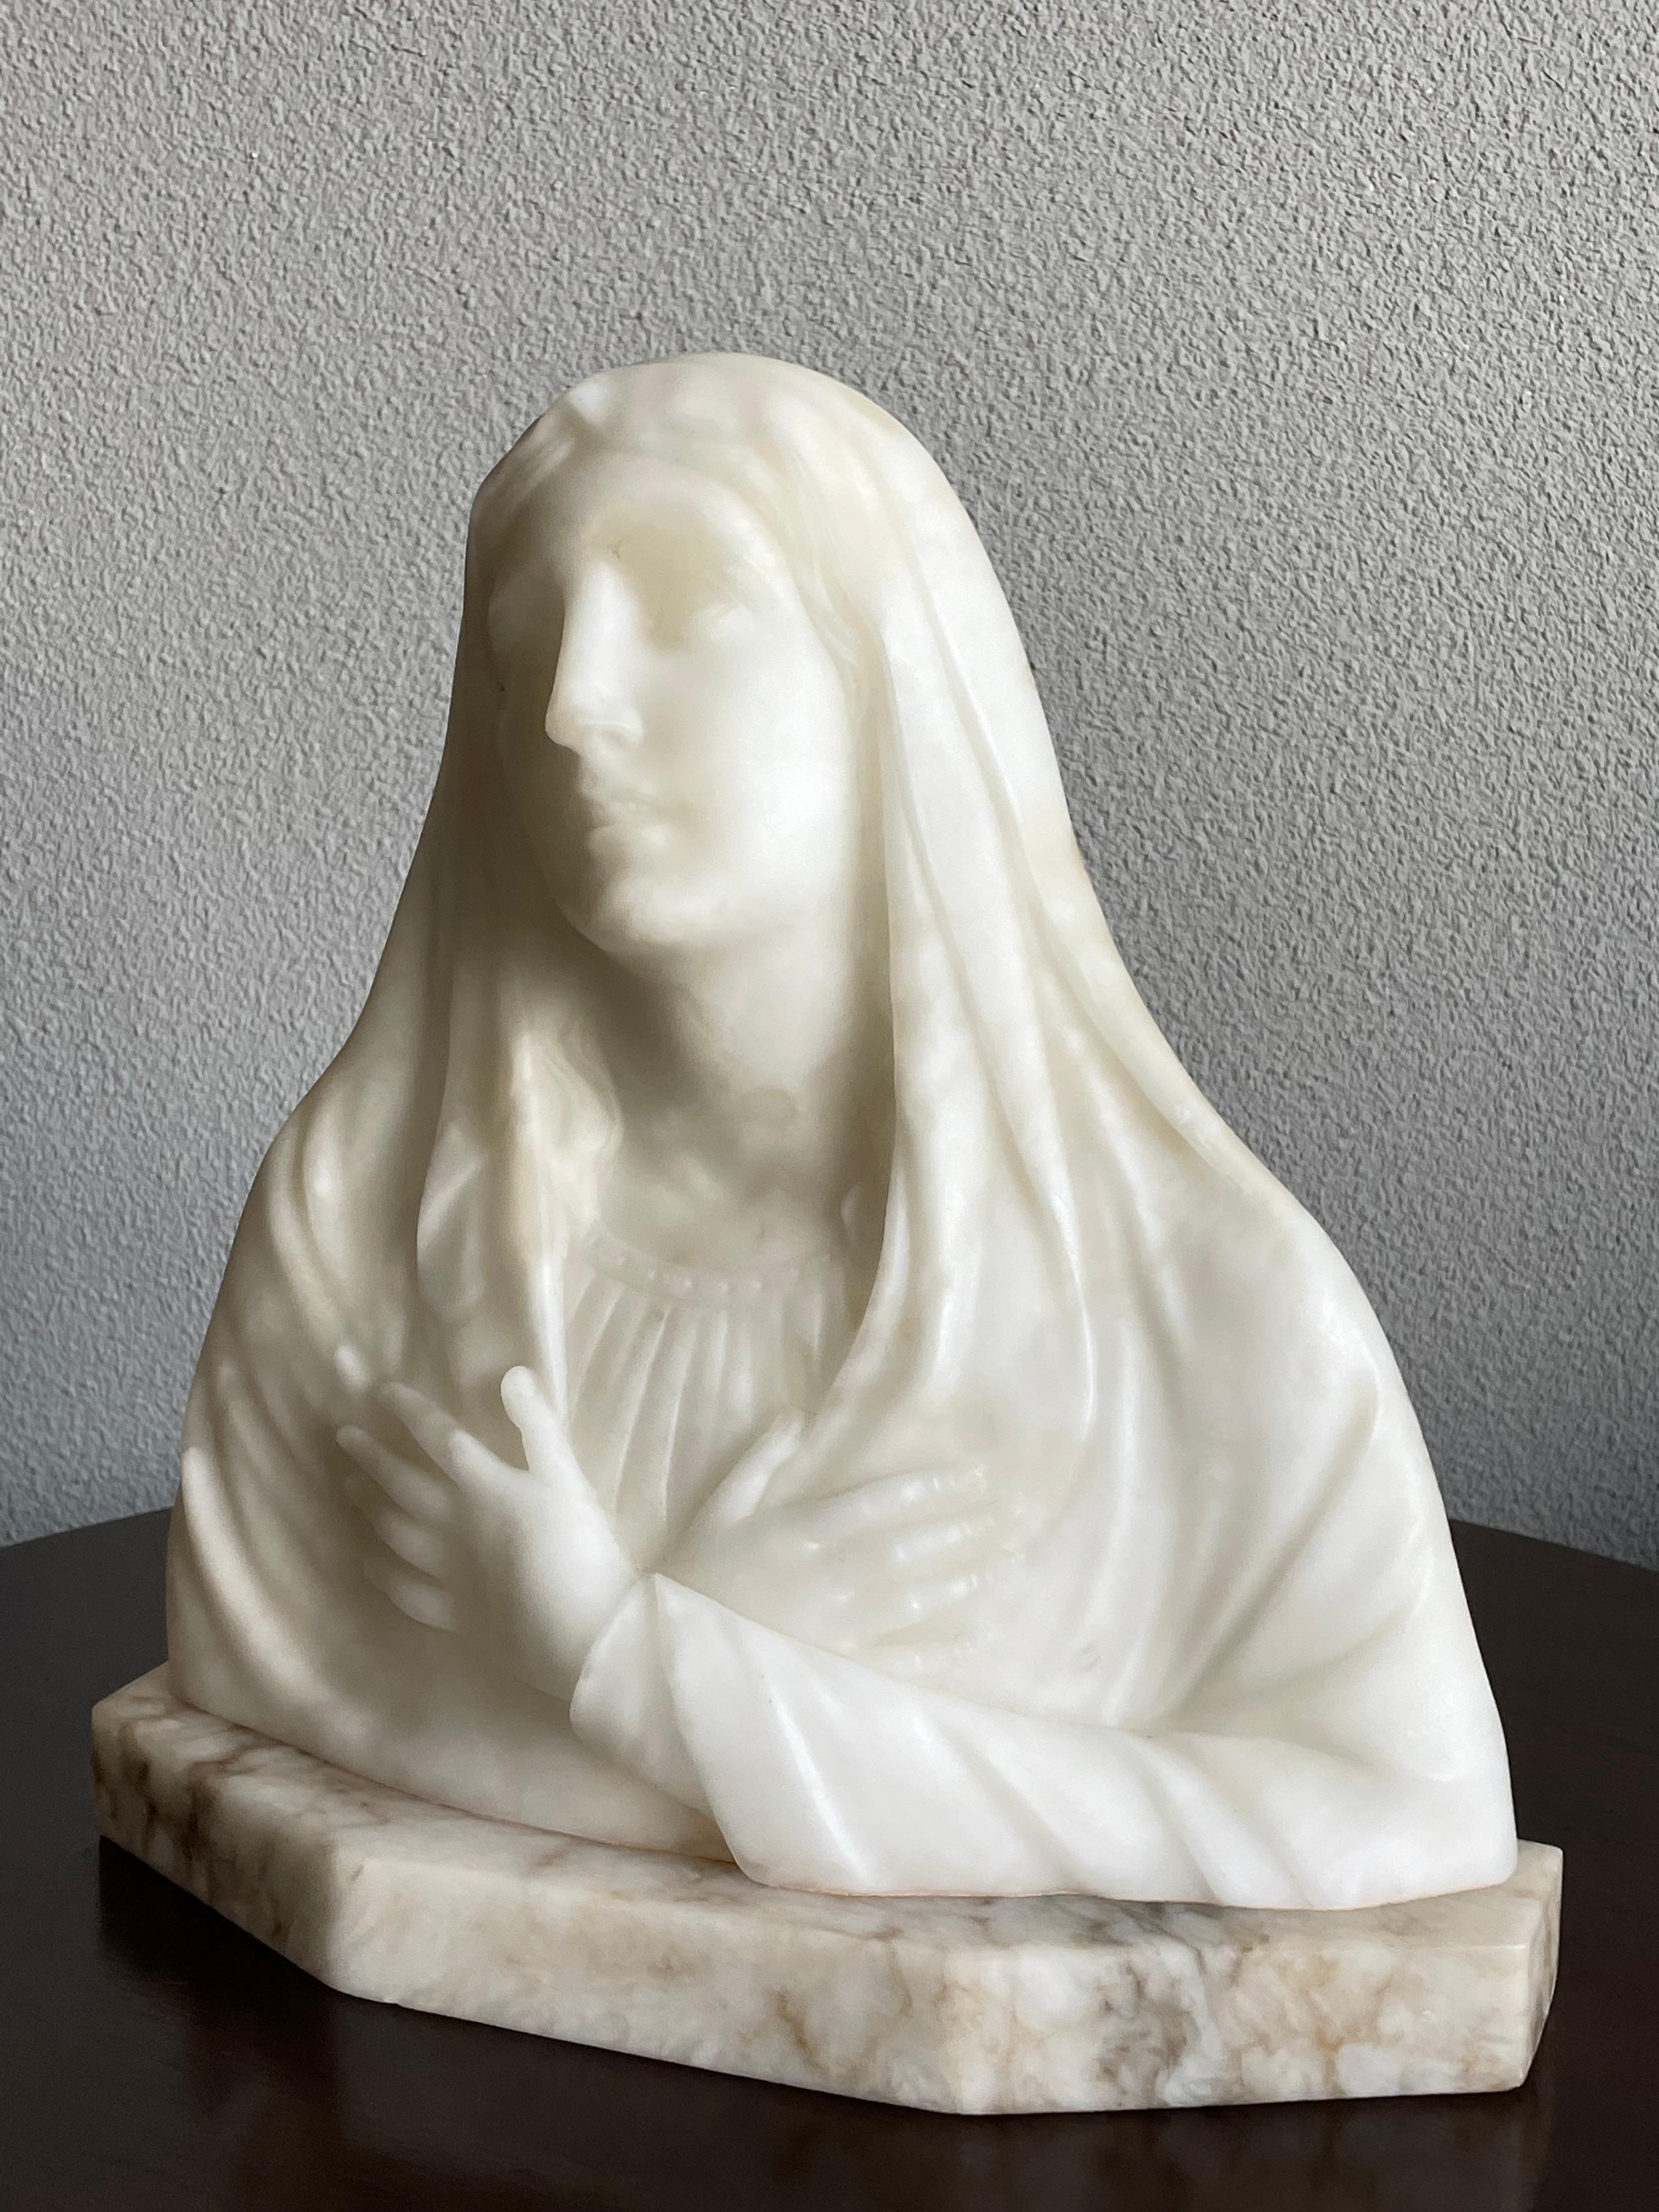 mary in mourning sculpture